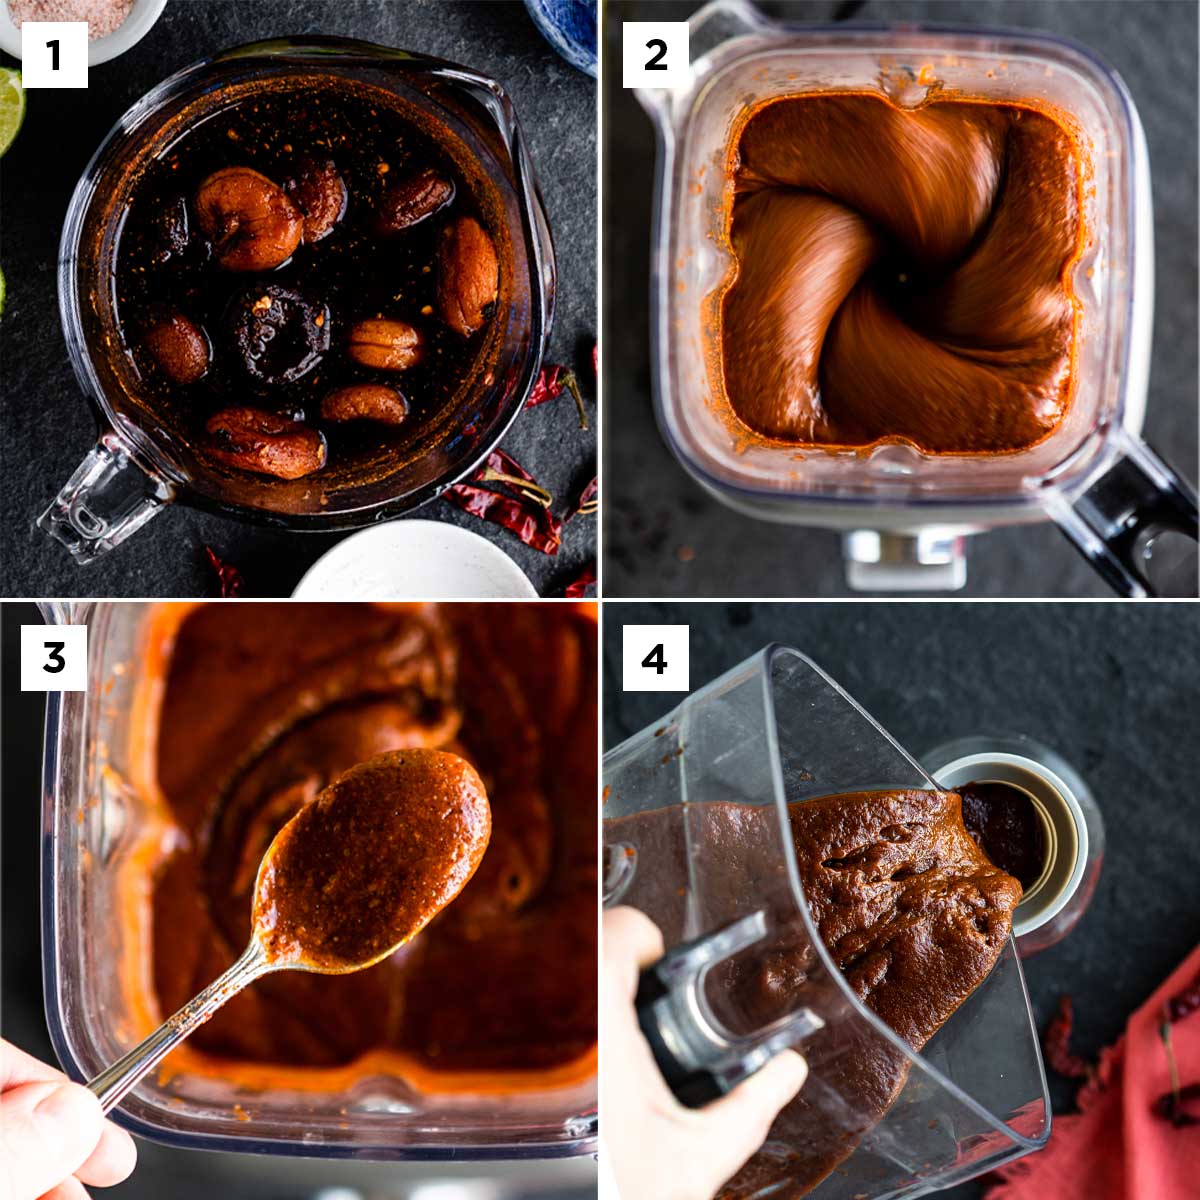 steps to chamoy sauce including soaking ingredients, pureeing in blender until smooth and transferring to glass jar for storage.